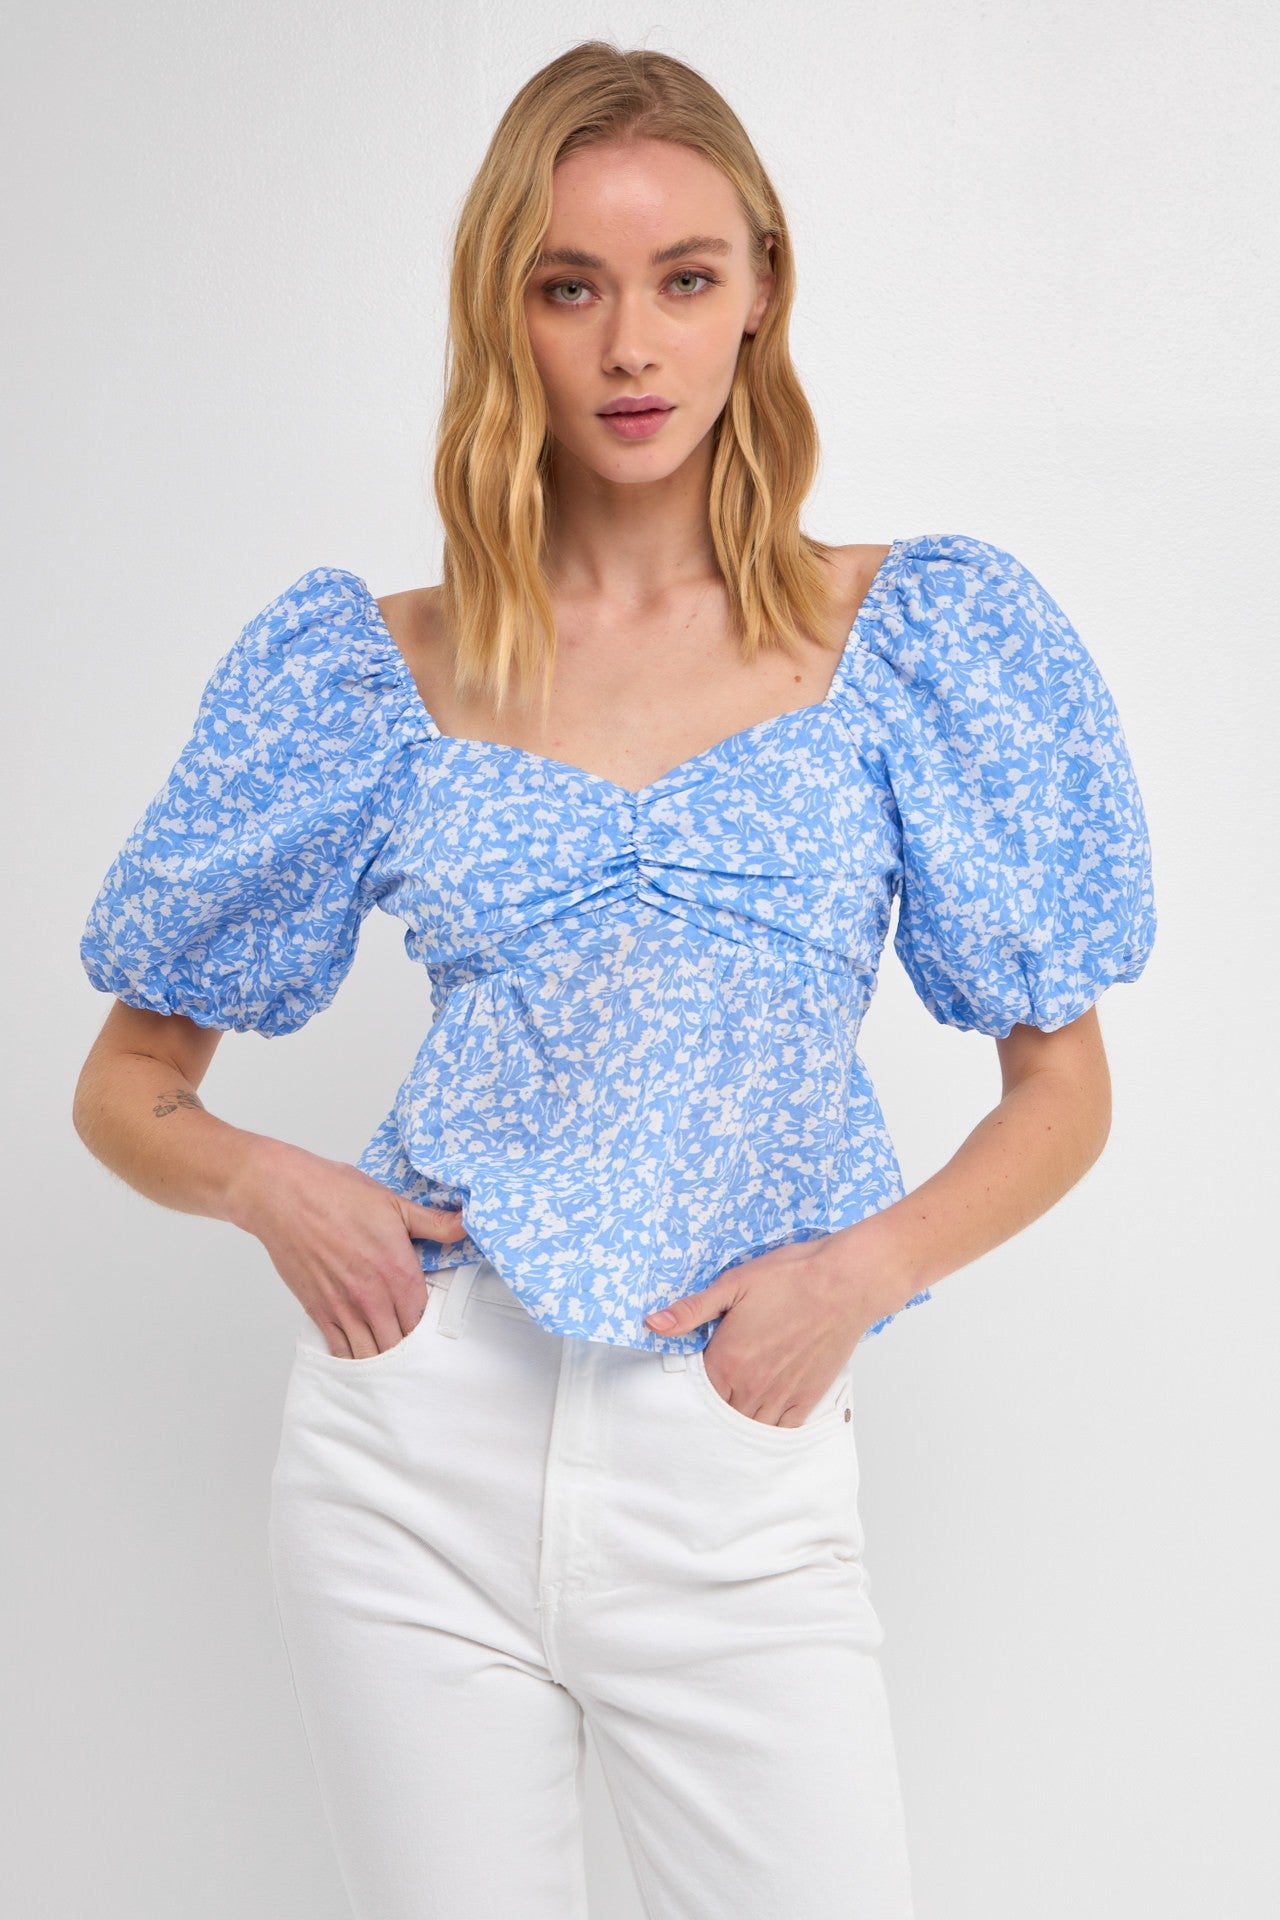 Blue/White Floral Puff Slv Tie Back Peplum Top